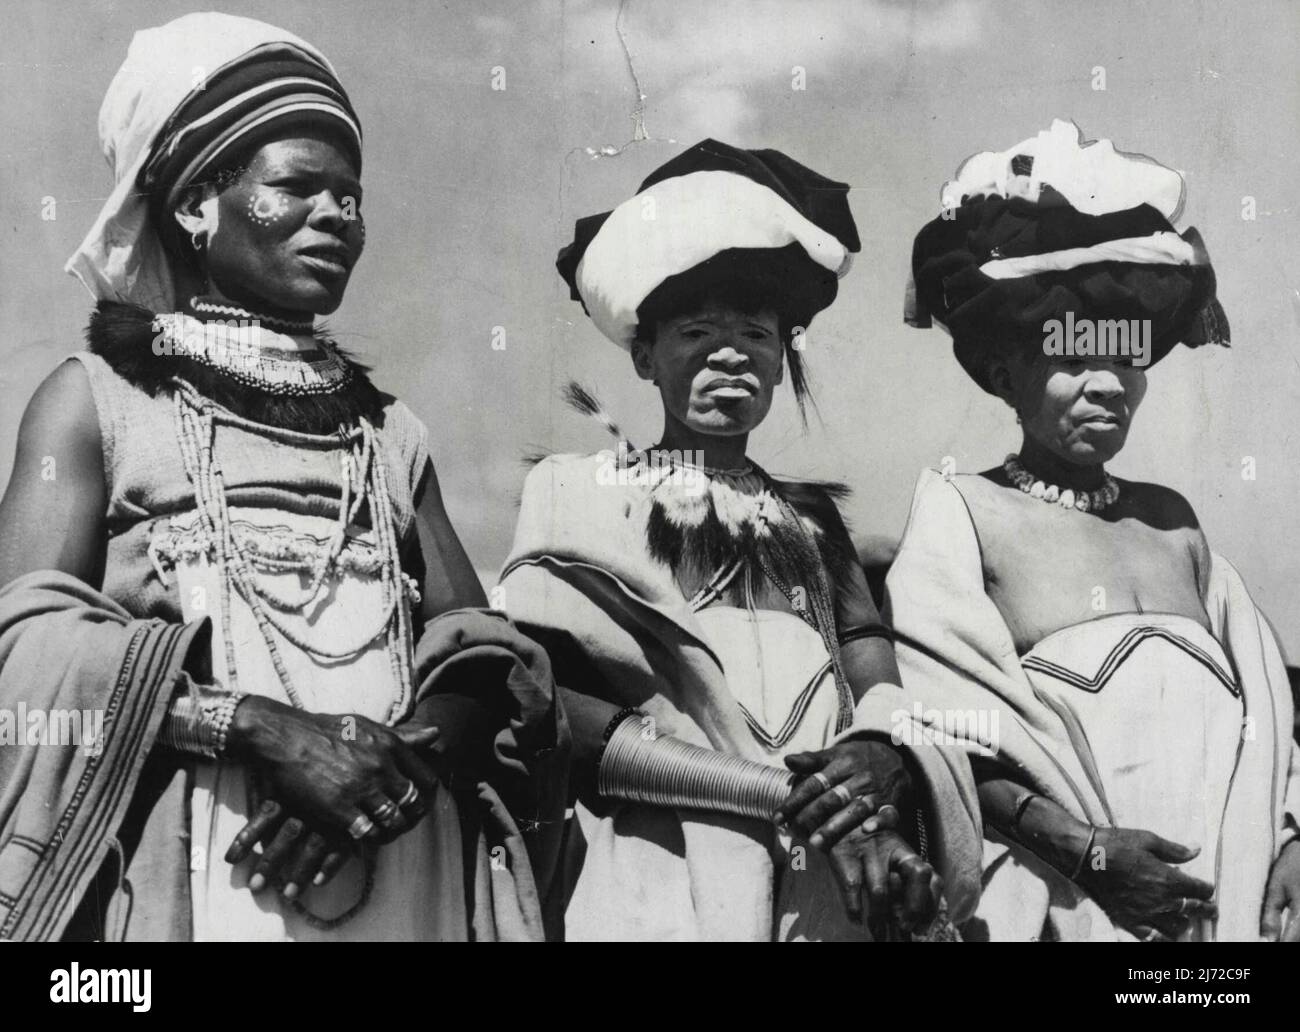 The Royal Tour Fashion Note From South Africa These three picturesque native women in full ceremonial dress were among the thousands of natives who demonstrated their loyalty to the King when the Royal Family paid a visit to the New Brighton native township at Port Elizabeth, Cape Province, South Africa. March 08, 1947. Stock Photo